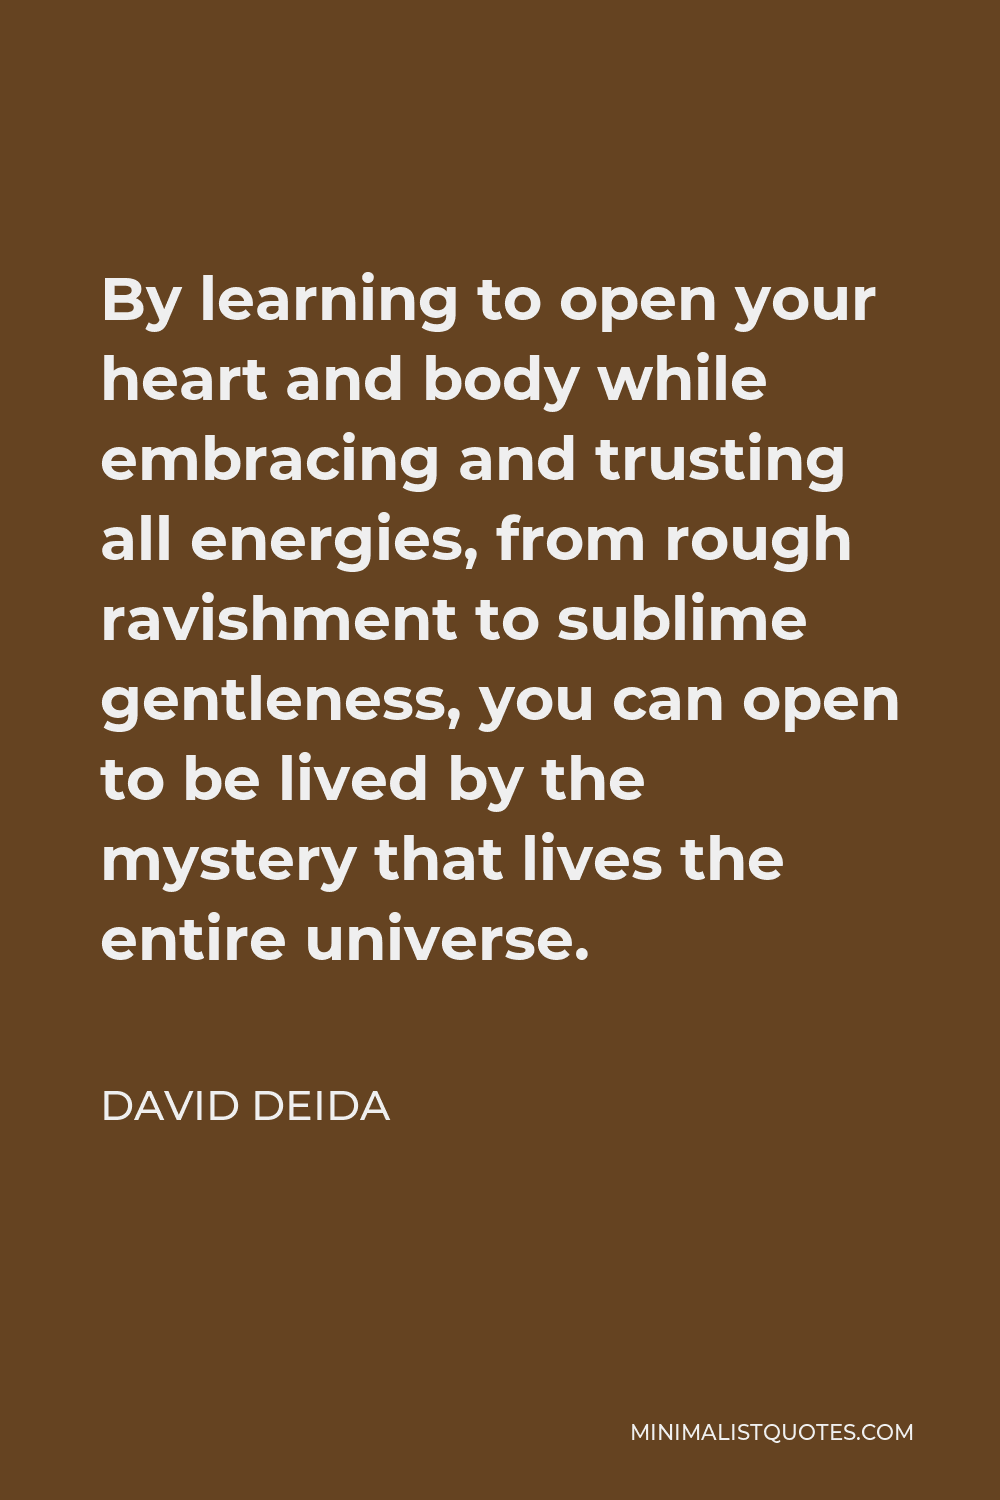 David Deida Quote - By learning to open your heart and body while embracing and trusting all energies, from rough ravishment to sublime gentleness, you can open to be lived by the mystery that lives the entire universe.